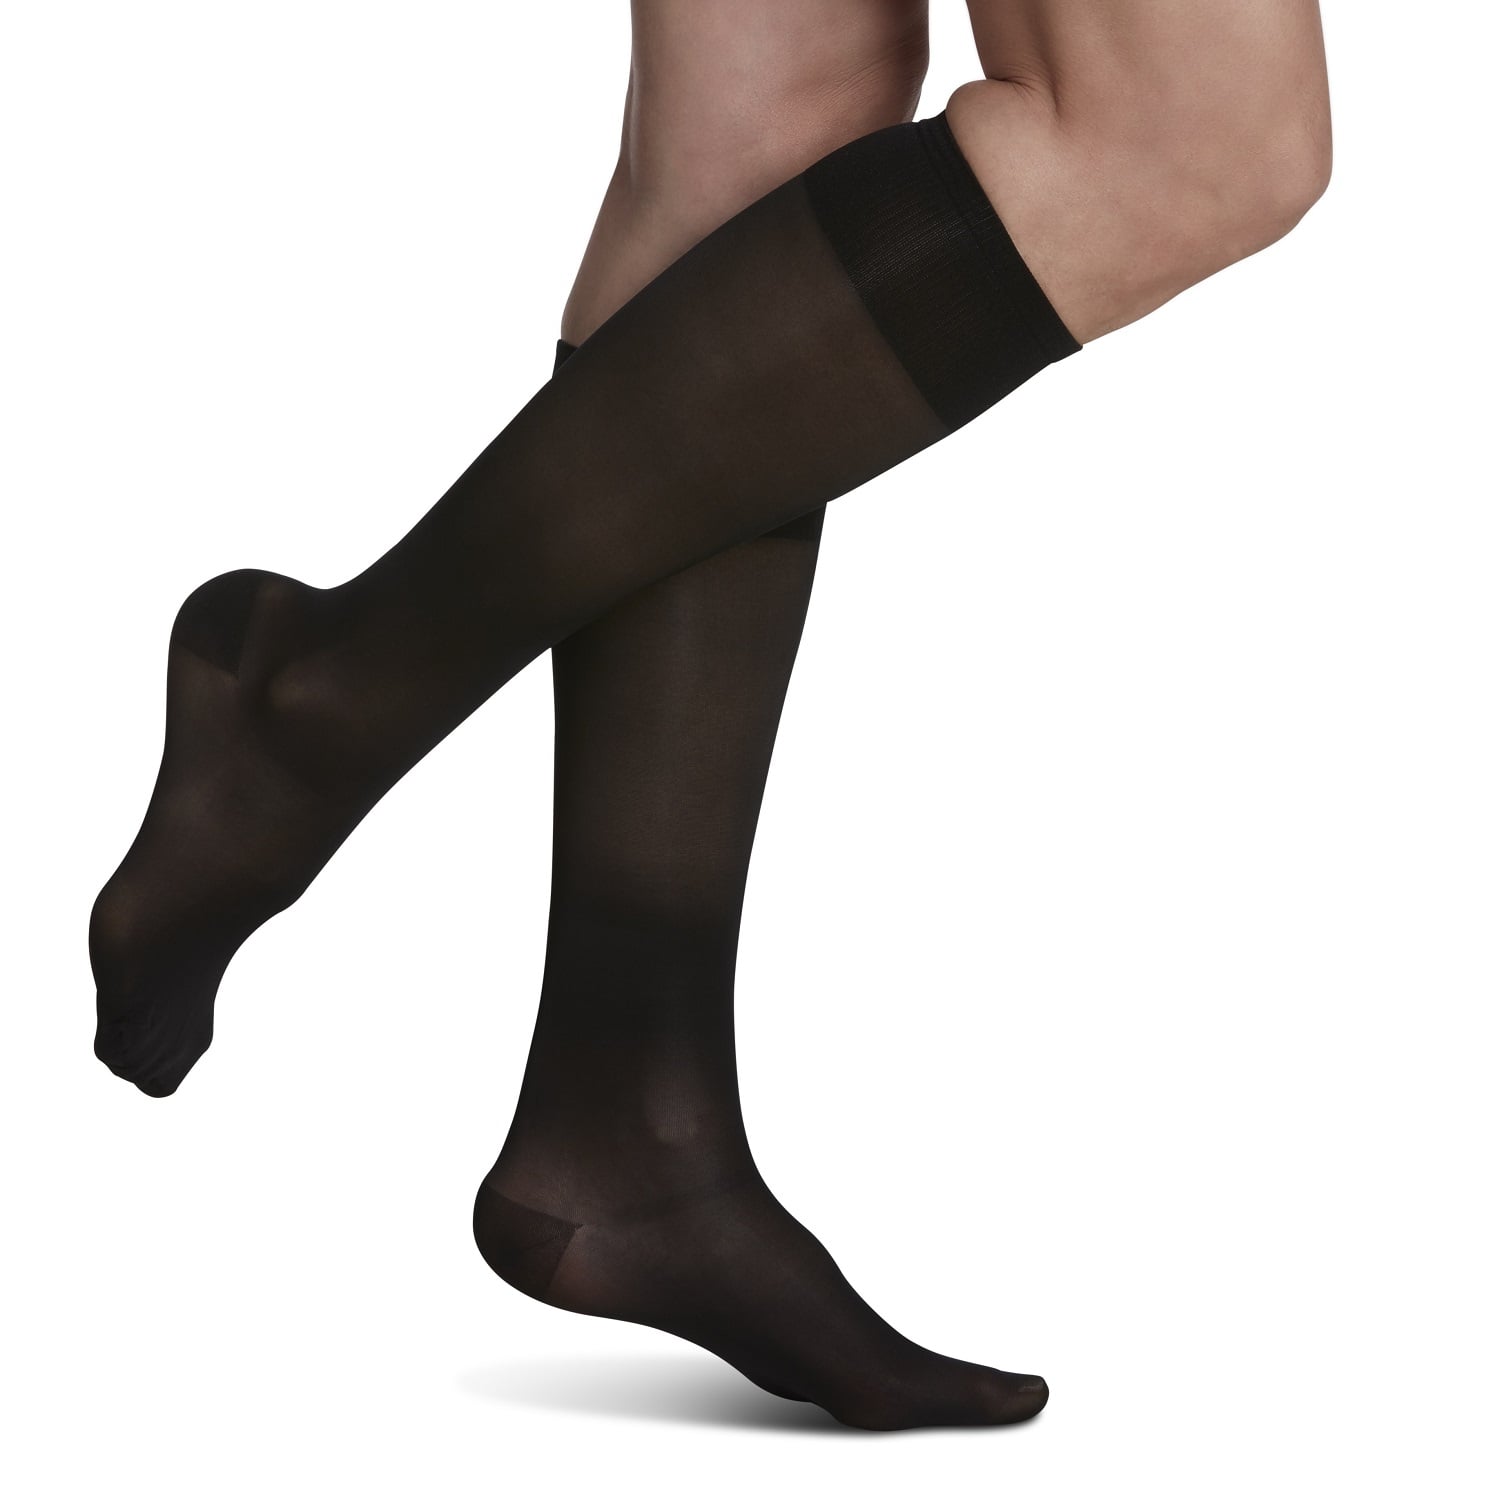 Sigvaris Women's Sheer Knee-High Compression Stockings 15-20 mmHg